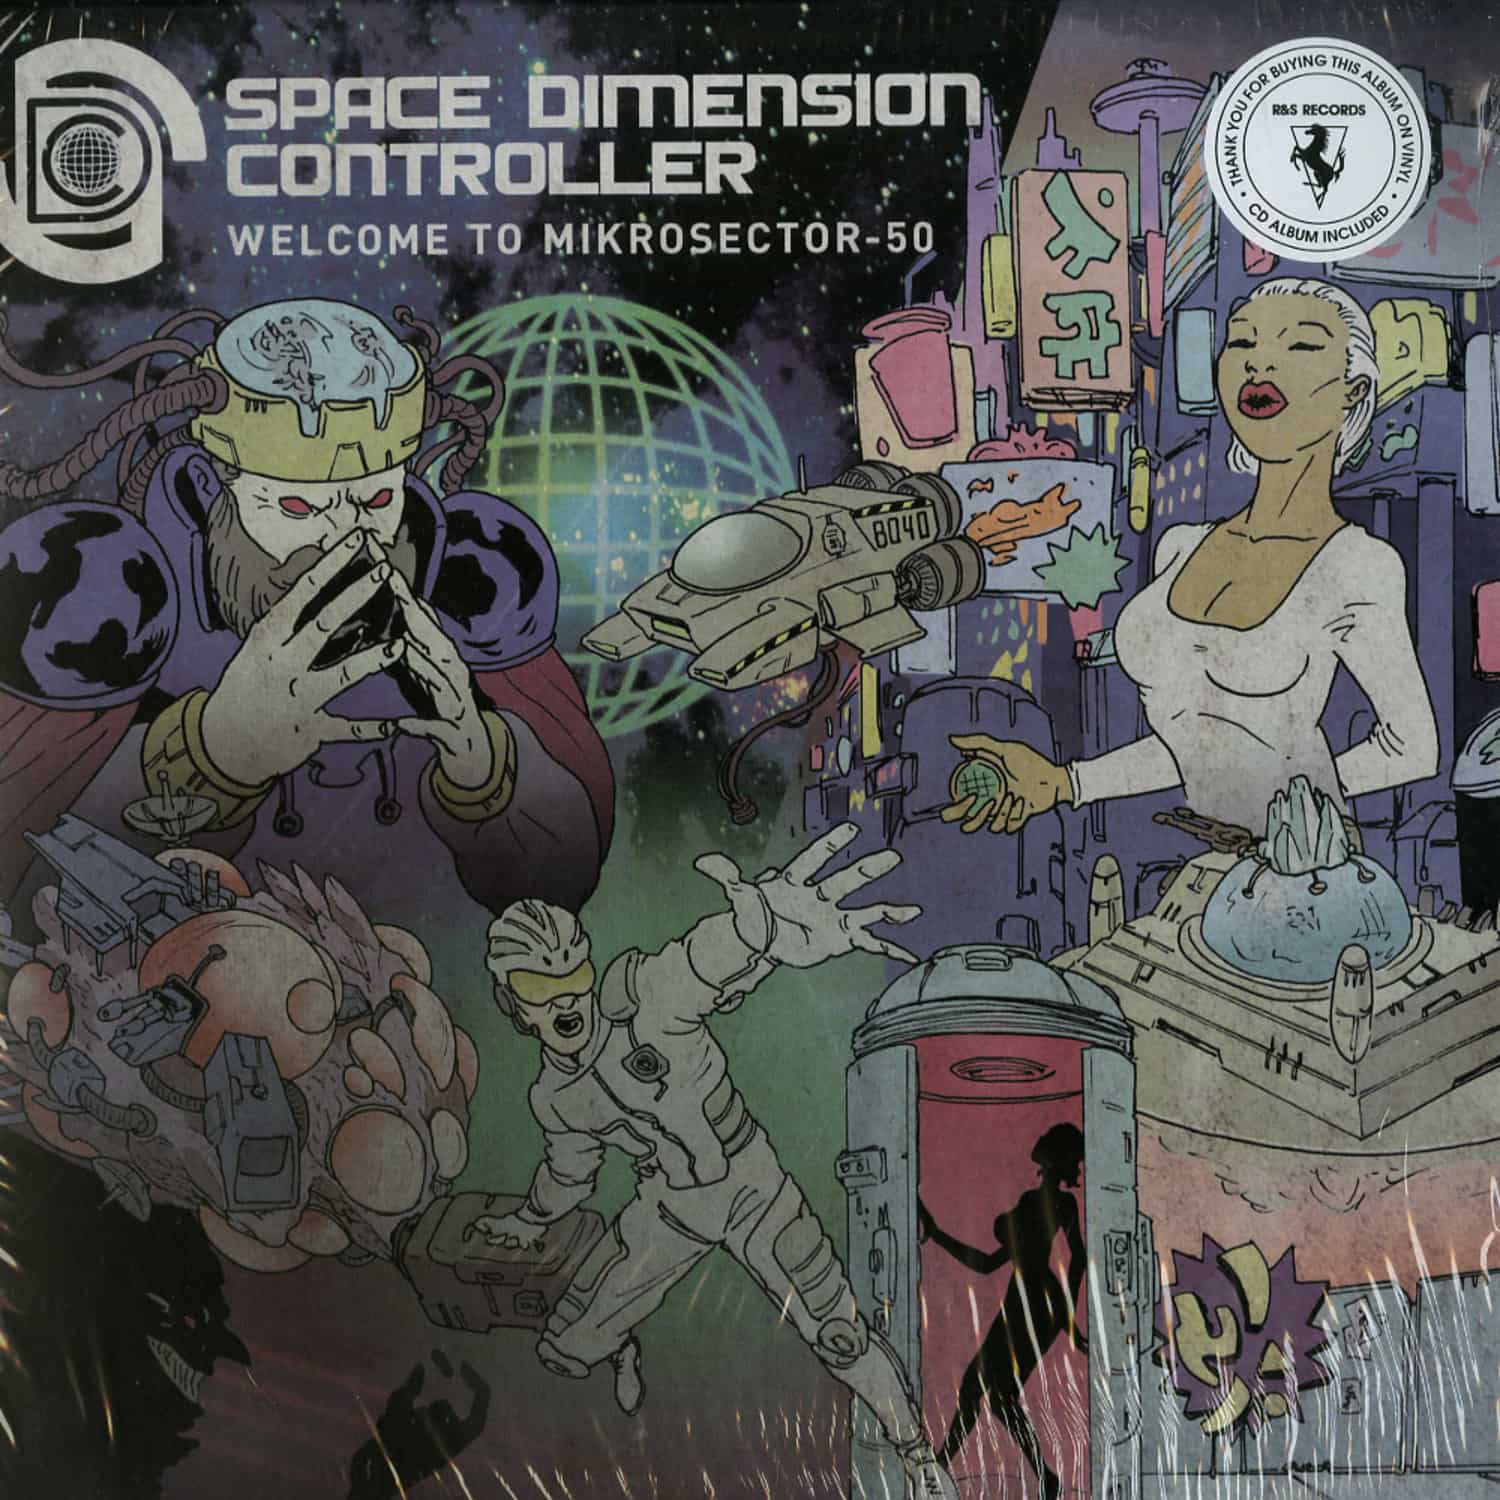 Space Dimension Controller - WELCOME TO MIKROSECTOR-50 